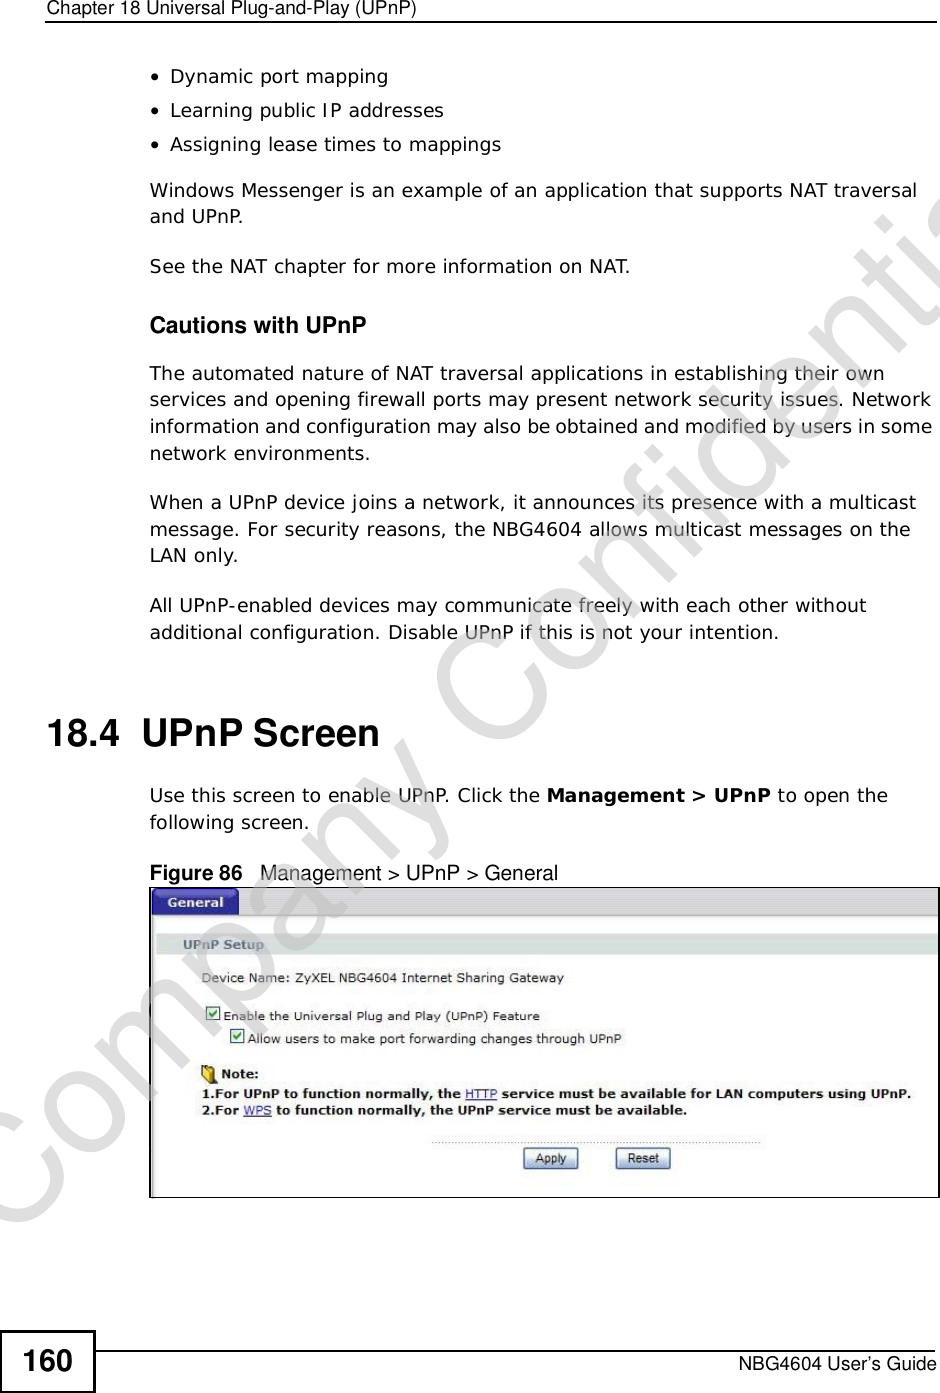 Chapter 18Universal Plug-and-Play (UPnP)NBG4604 User’s Guide160•Dynamic port mapping•Learning public IP addresses•Assigning lease times to mappingsWindows Messenger is an example of an application that supports NAT traversal and UPnP. See the NAT chapter for more information on NAT.Cautions with UPnPThe automated nature of NAT traversal applications in establishing their own services and opening firewall ports may present network security issues. Network information and configuration may also be obtained and modified by users in some network environments. When a UPnP device joins a network, it announces its presence with a multicast message. For security reasons, the NBG4604 allows multicast messages on the LAN only.All UPnP-enabled devices may communicate freely with each other without additional configuration. Disable UPnP if this is not your intention. 18.4  UPnP ScreenUse this screen to enable UPnP. Click the Management &gt; UPnP to open the following screen.Figure 86   Management &gt; UPnP &gt; General Company Confidential